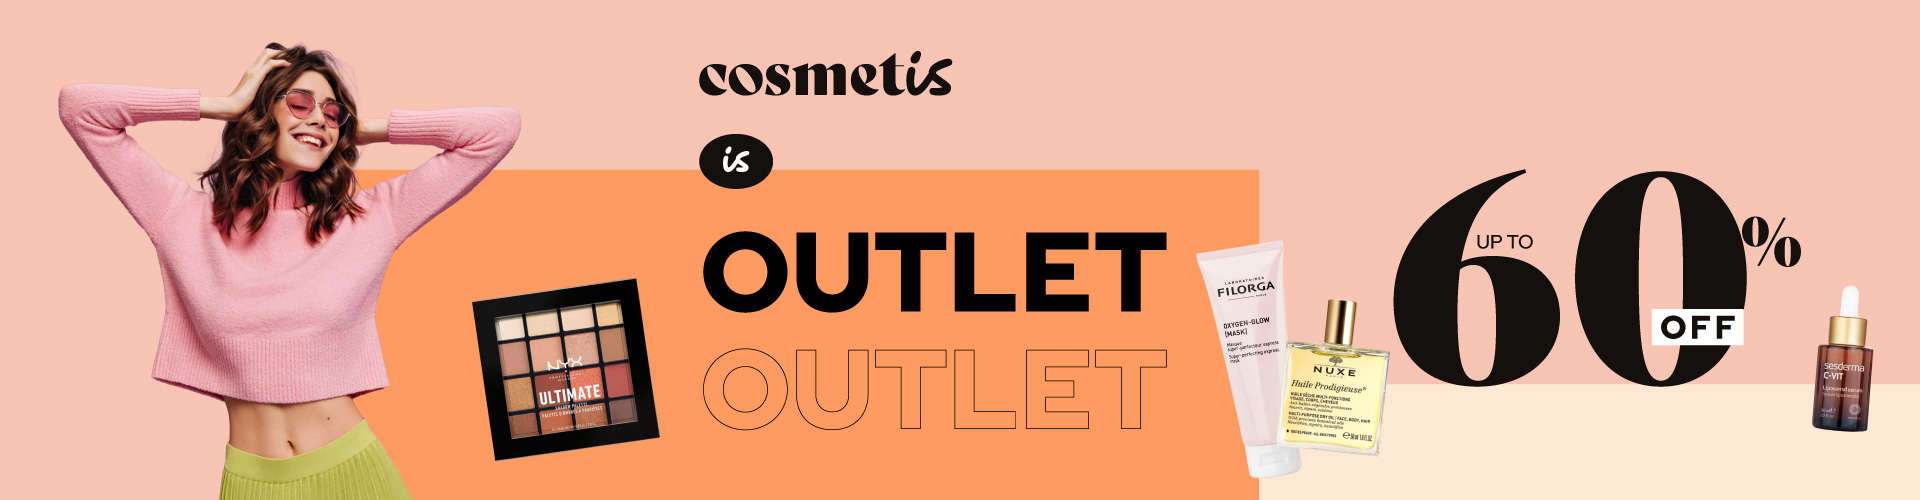 Cosmetis is Outlet